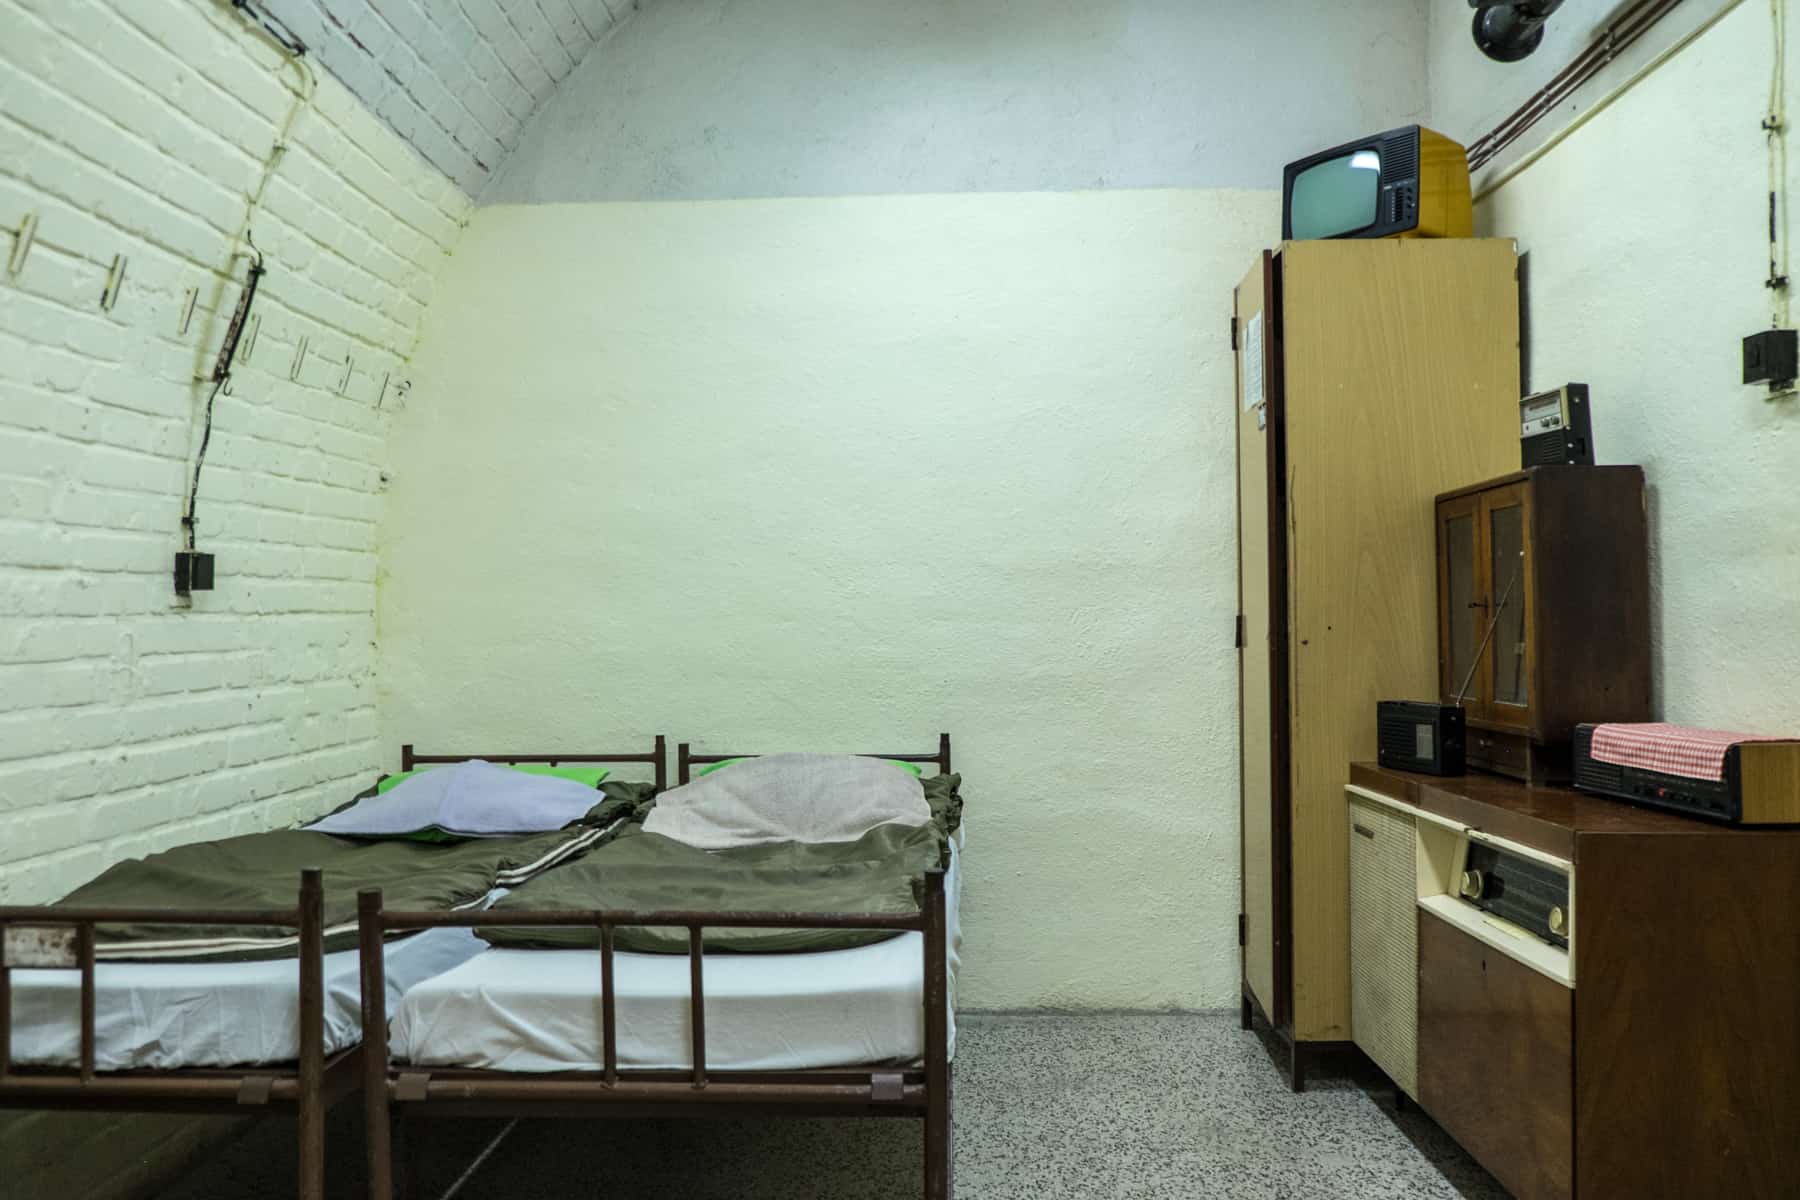 Two iron frame beds with green sleeping bags, and a selection of dated wooden furniture - a double room at the 10-Z bunker in Brno, a former nuclear fallout shelter. 